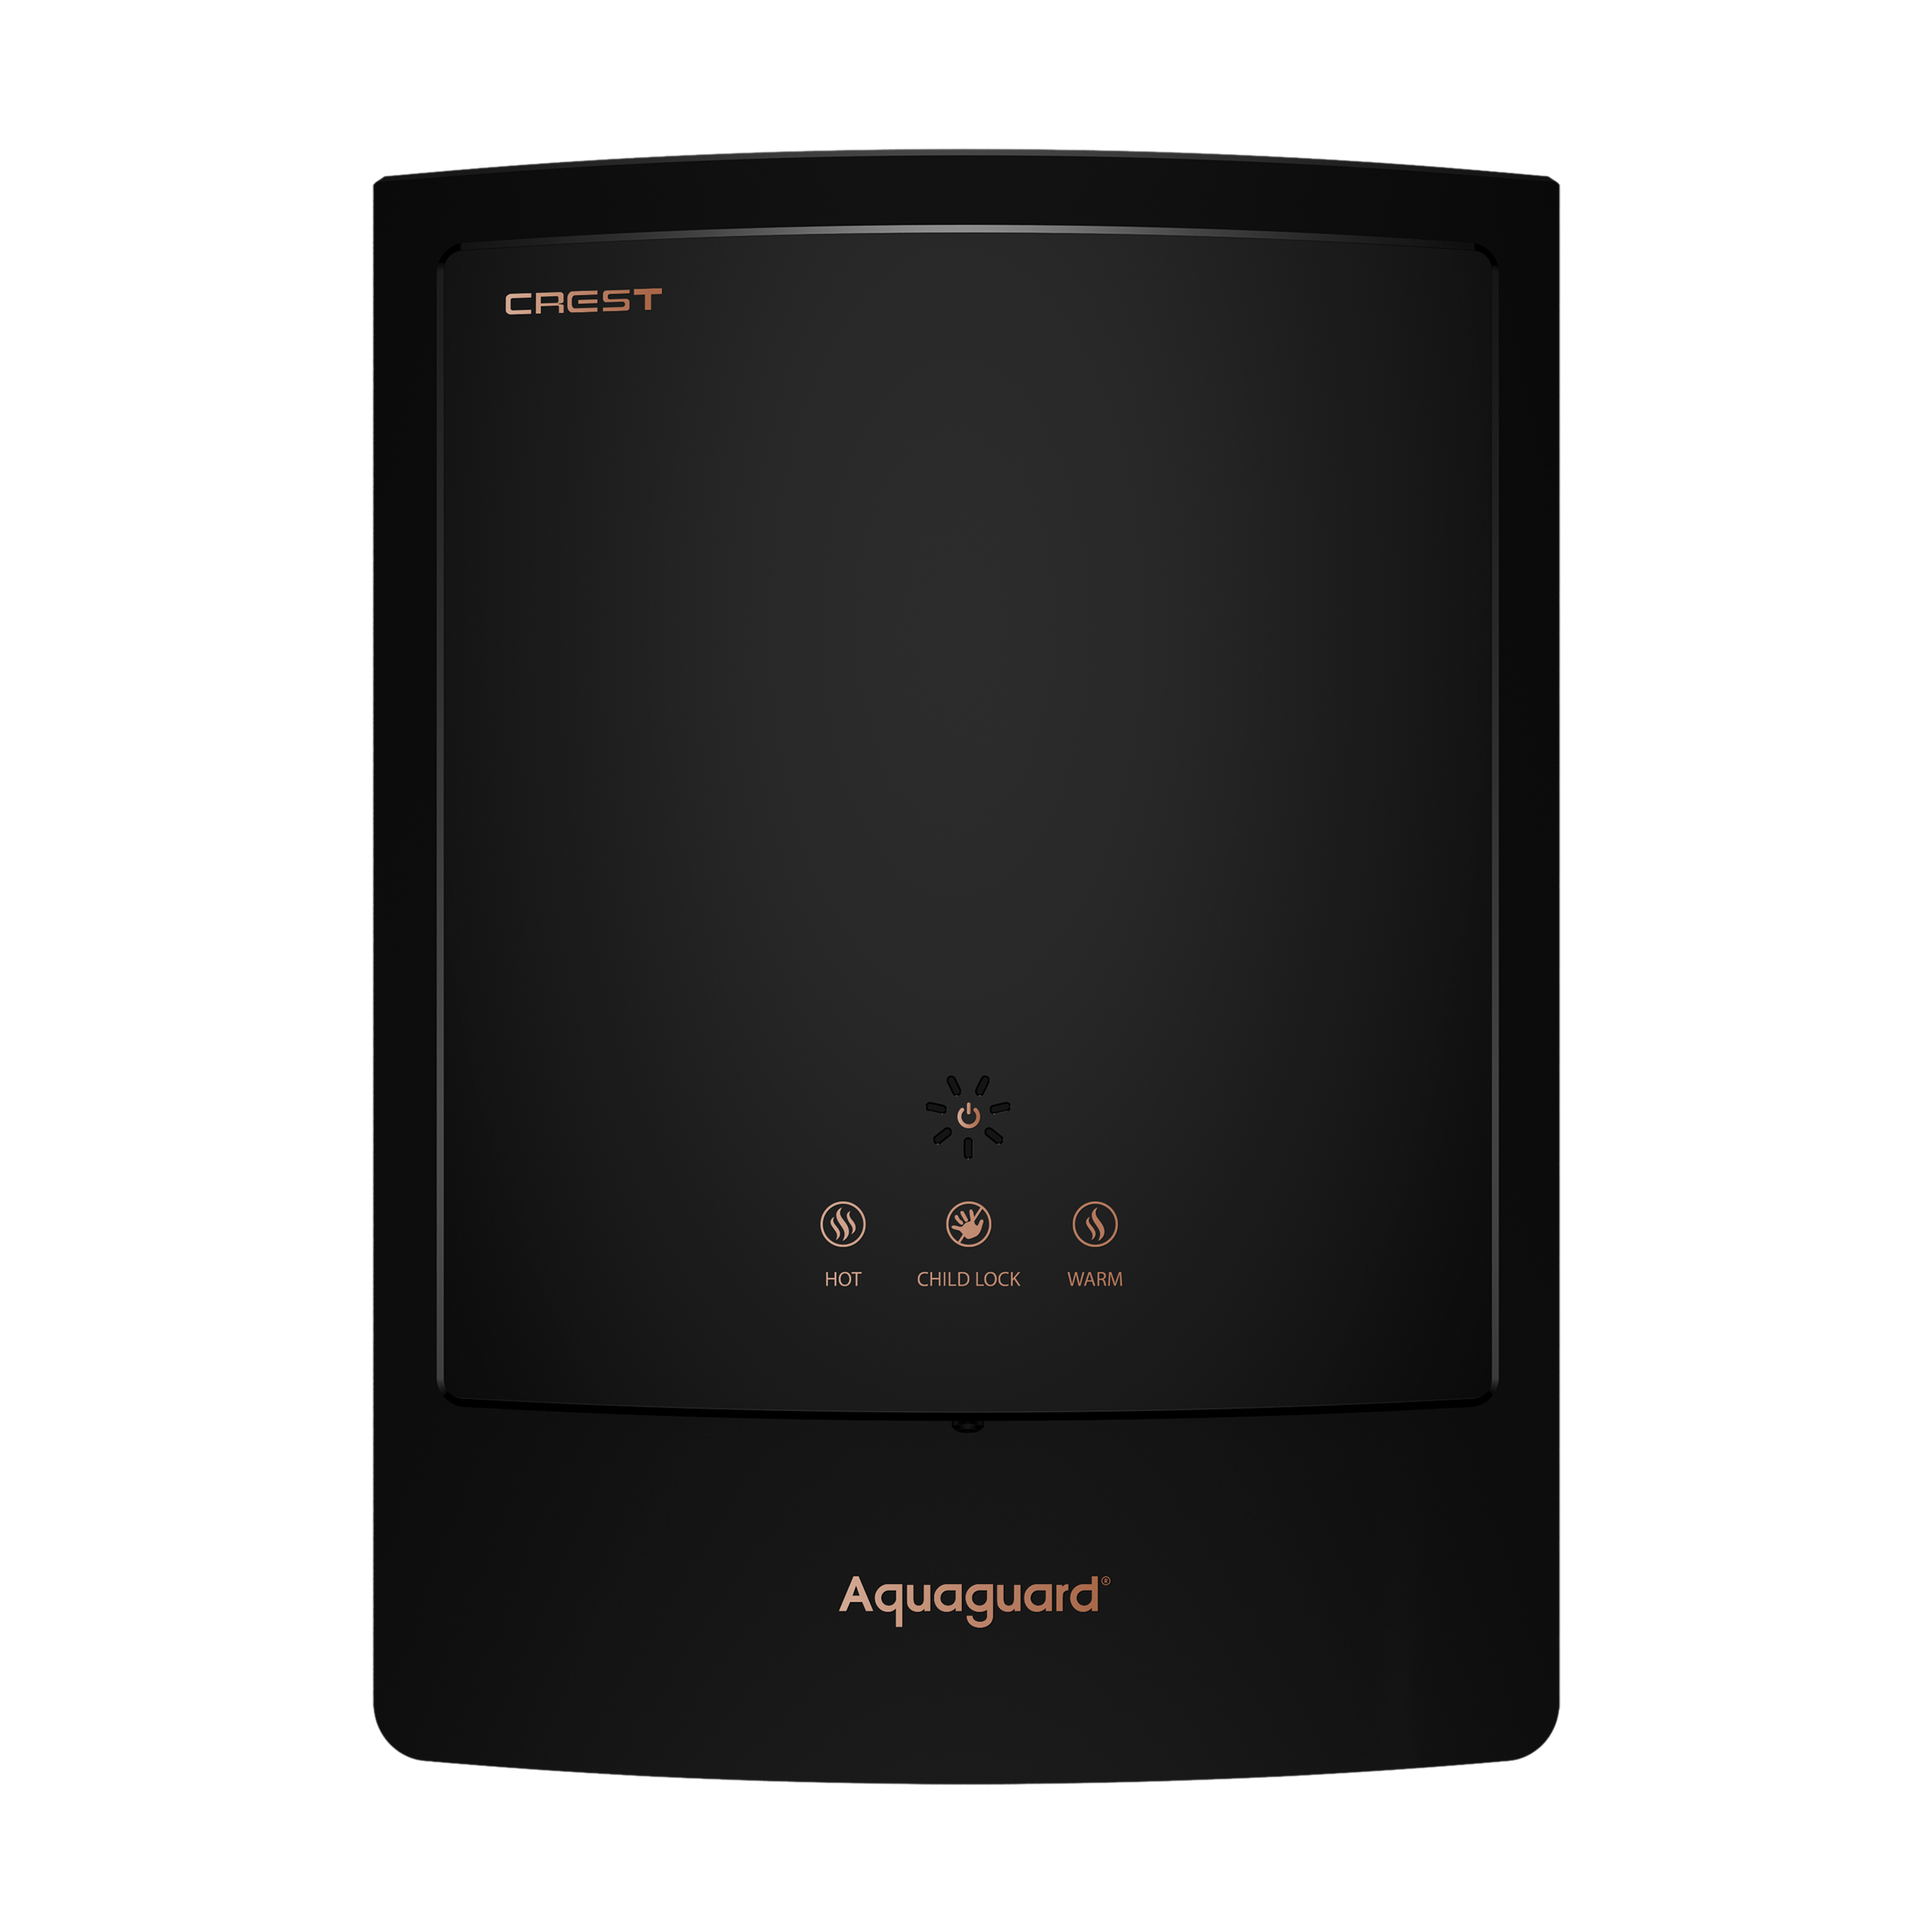 Aquaguard Crest UV Hot & Cold Water Purifier with Touch Sense Technology (Black)